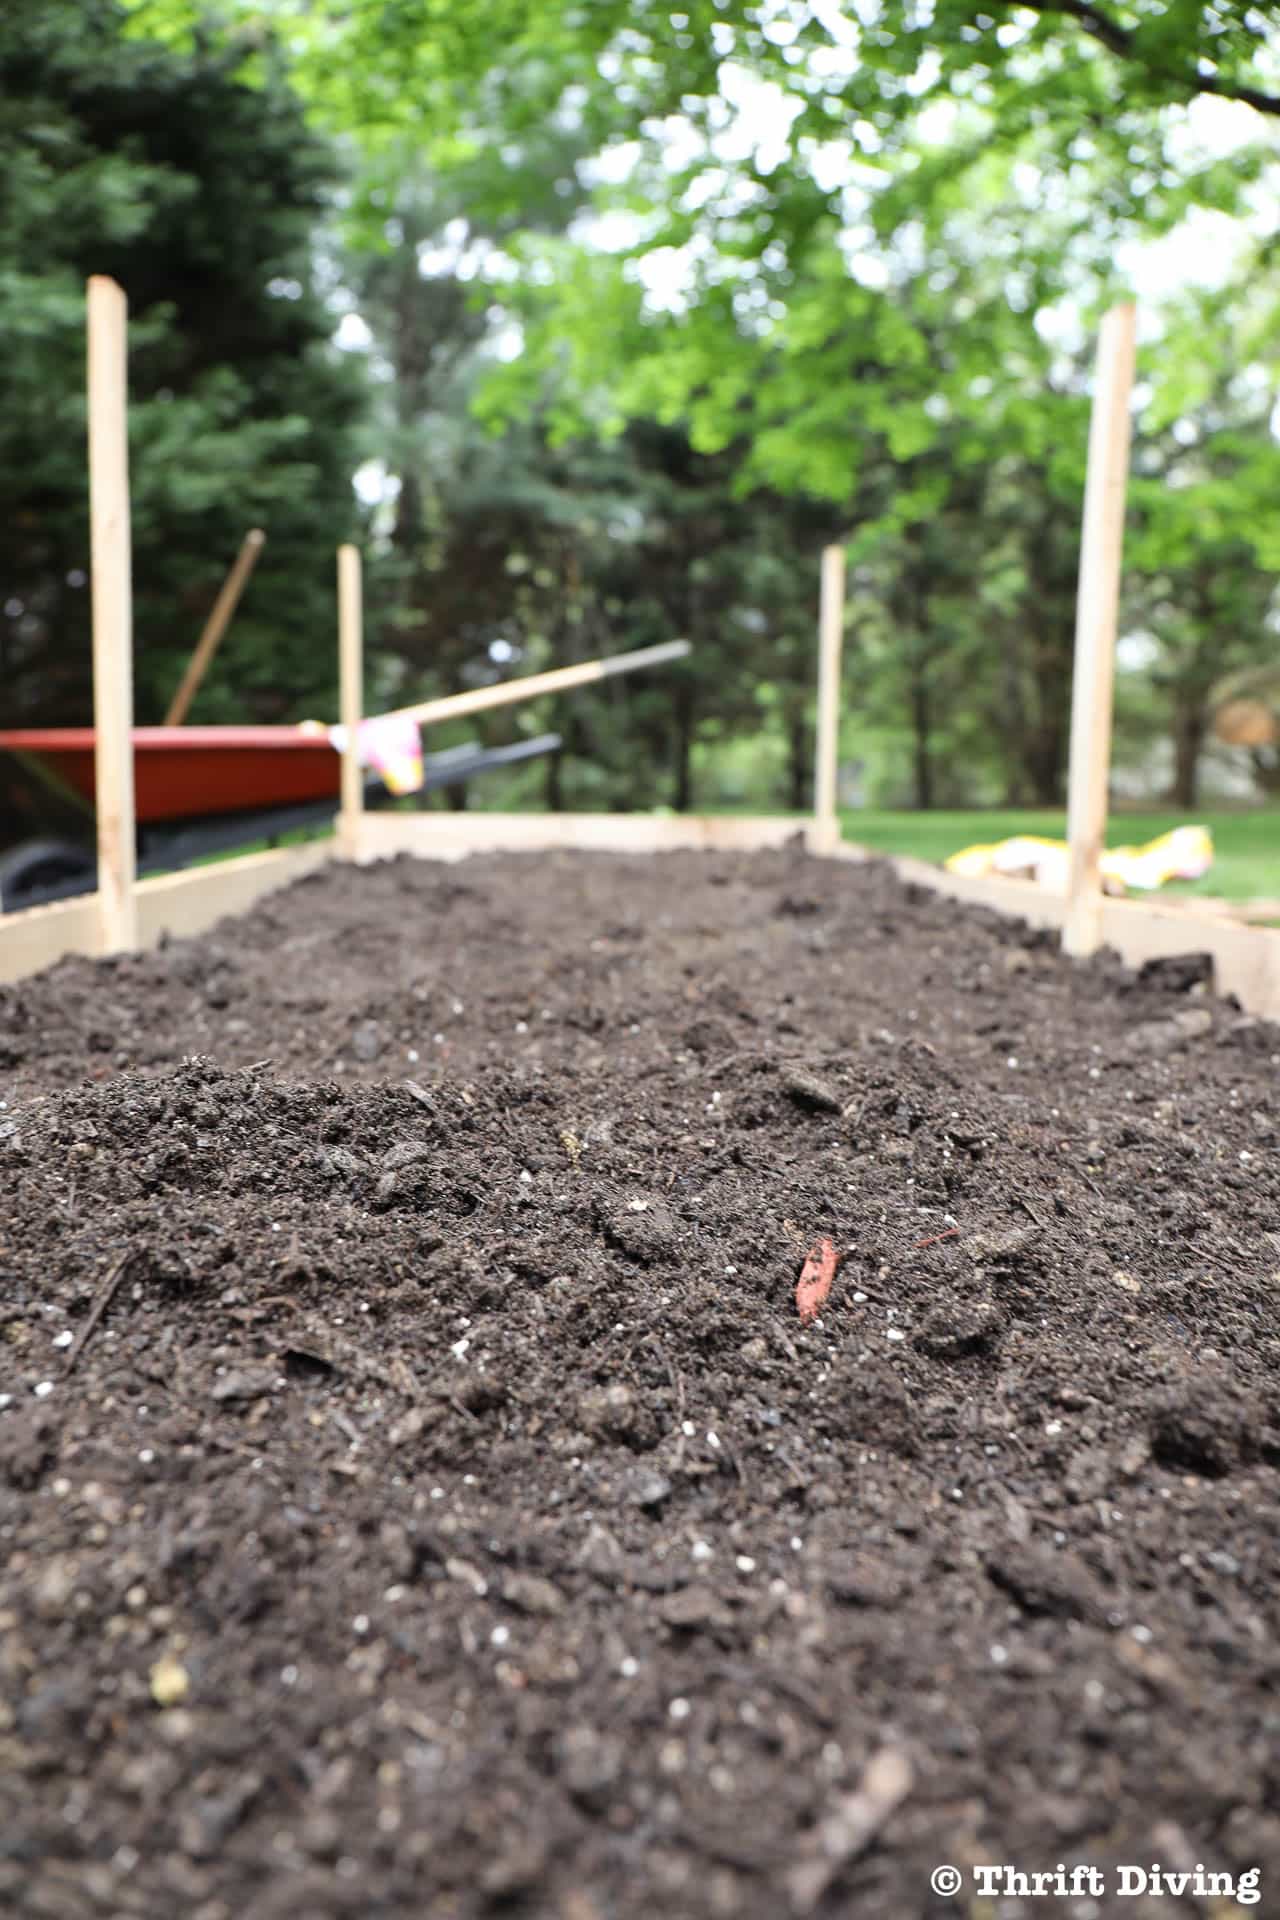 How to Build a Raised Garden Bed Protected With a Metal Fence - Use soil that has compost mixed in. - Thrift Diving